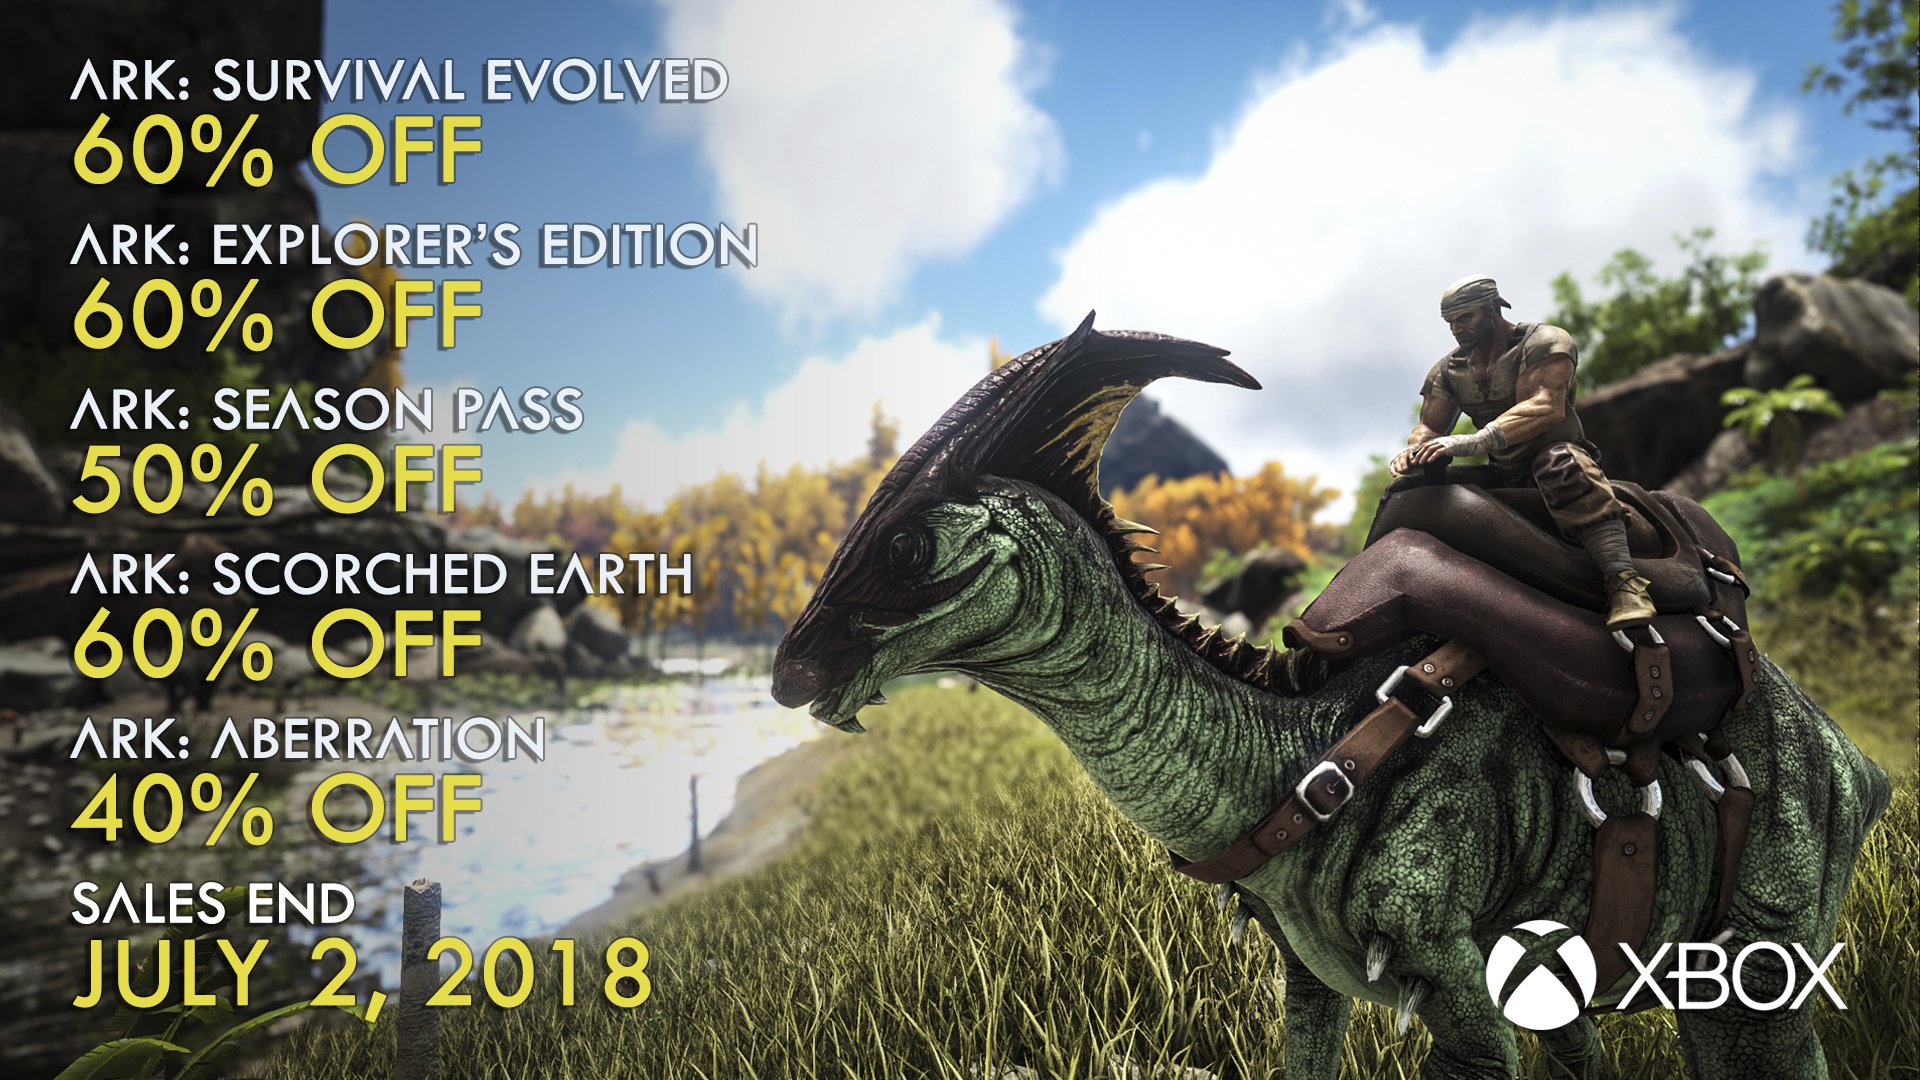 Ark Survival Evolved It S Our Biggest Ark Sale Ever The Base Game And Its Expansions Are Currently On Sale At Their Lowest Prices Across All Platforms Region Specific During Our